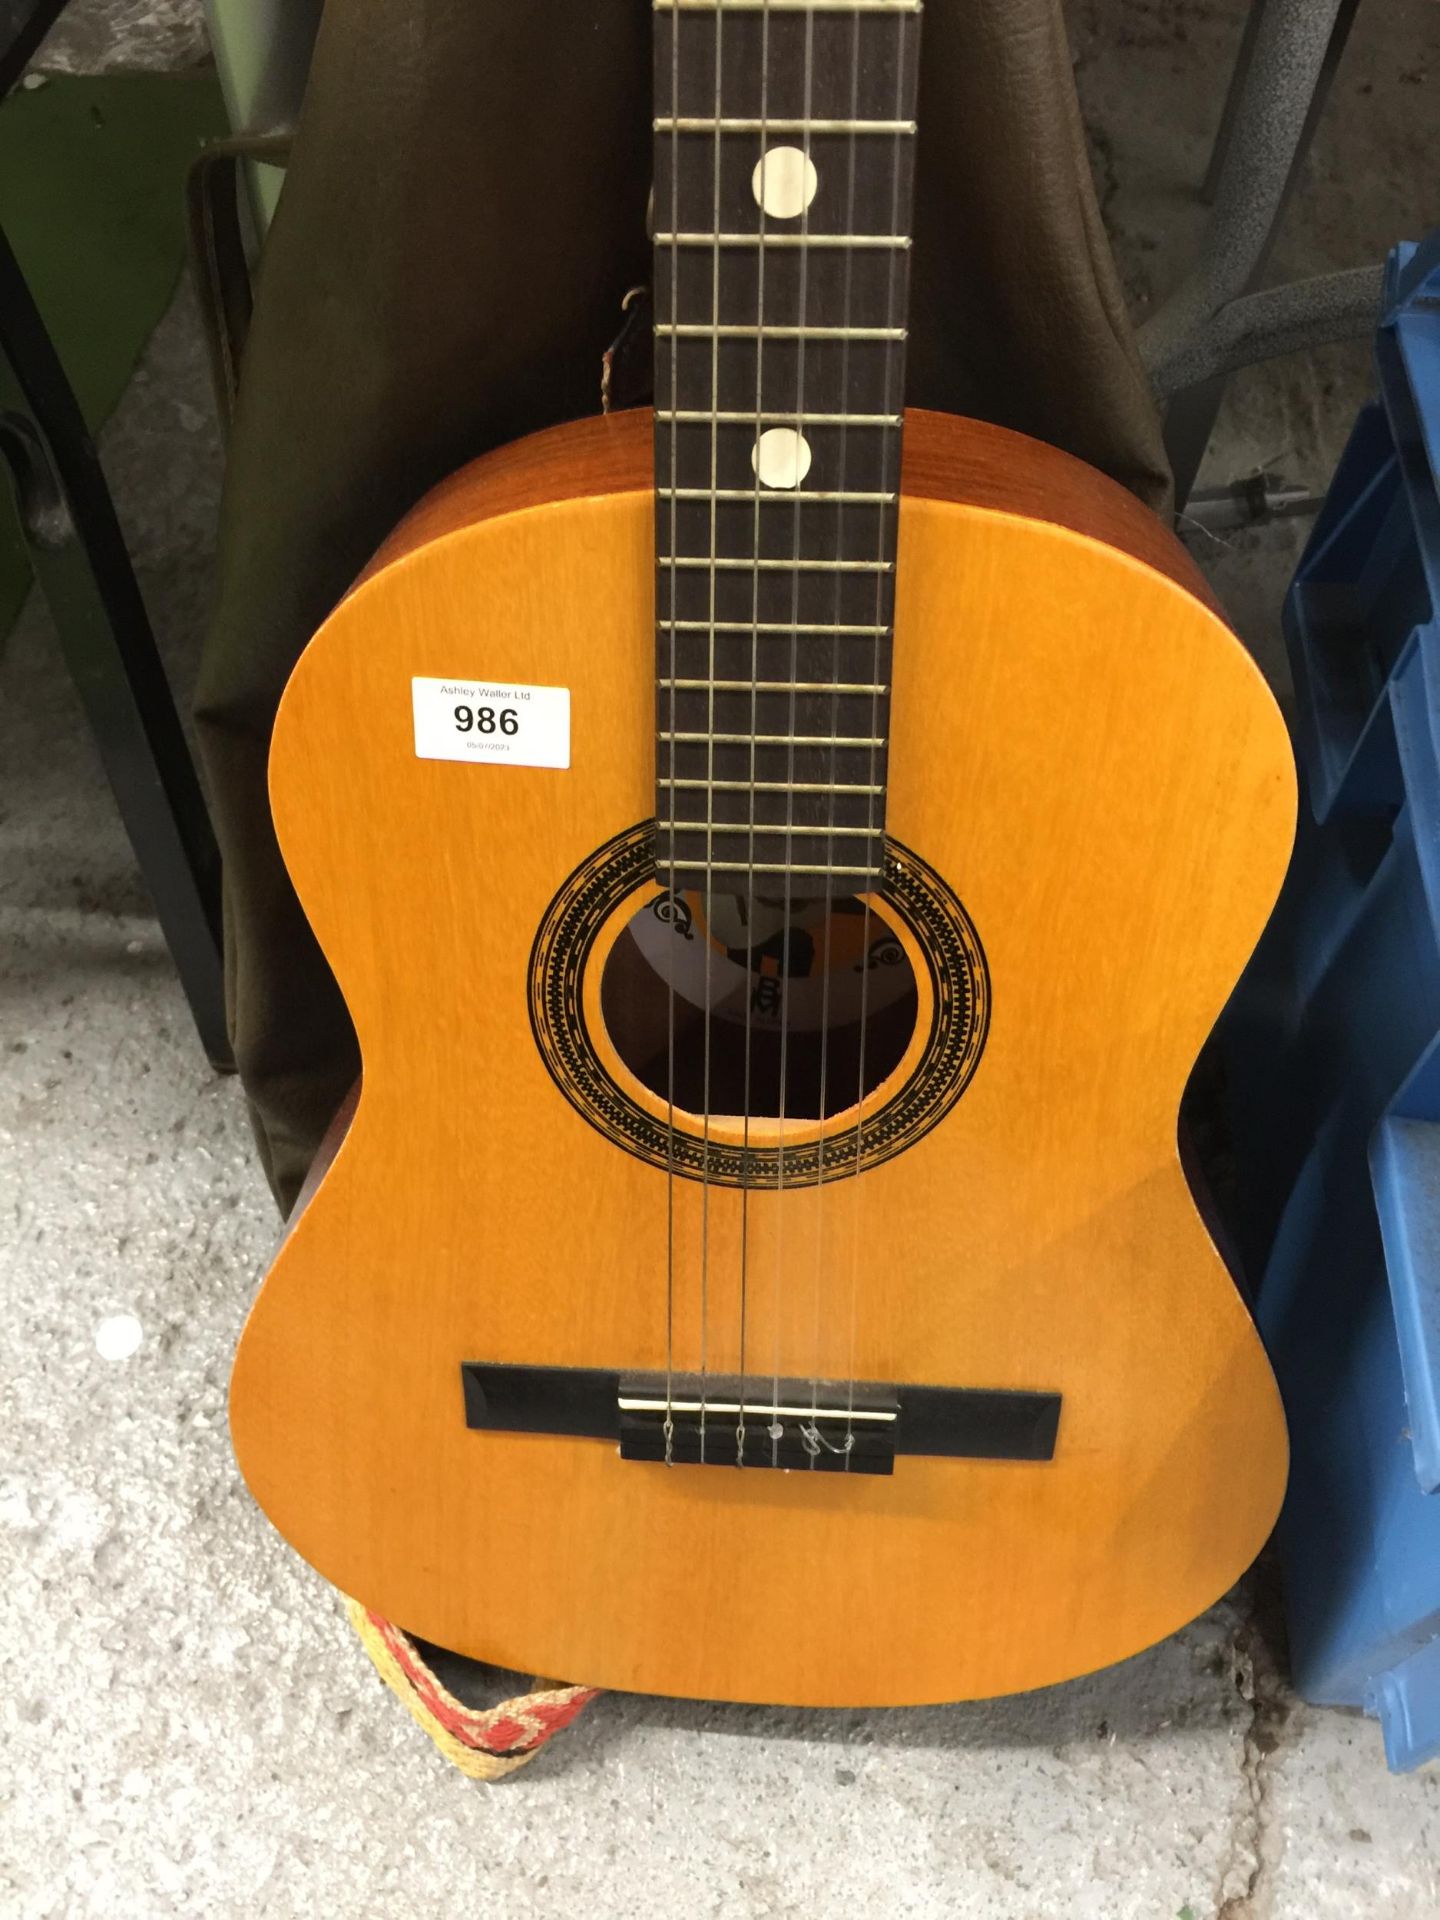 A CHILD'S 'INFANTE' ACCOUSTIC GUITAR WITH CASE - Image 2 of 4